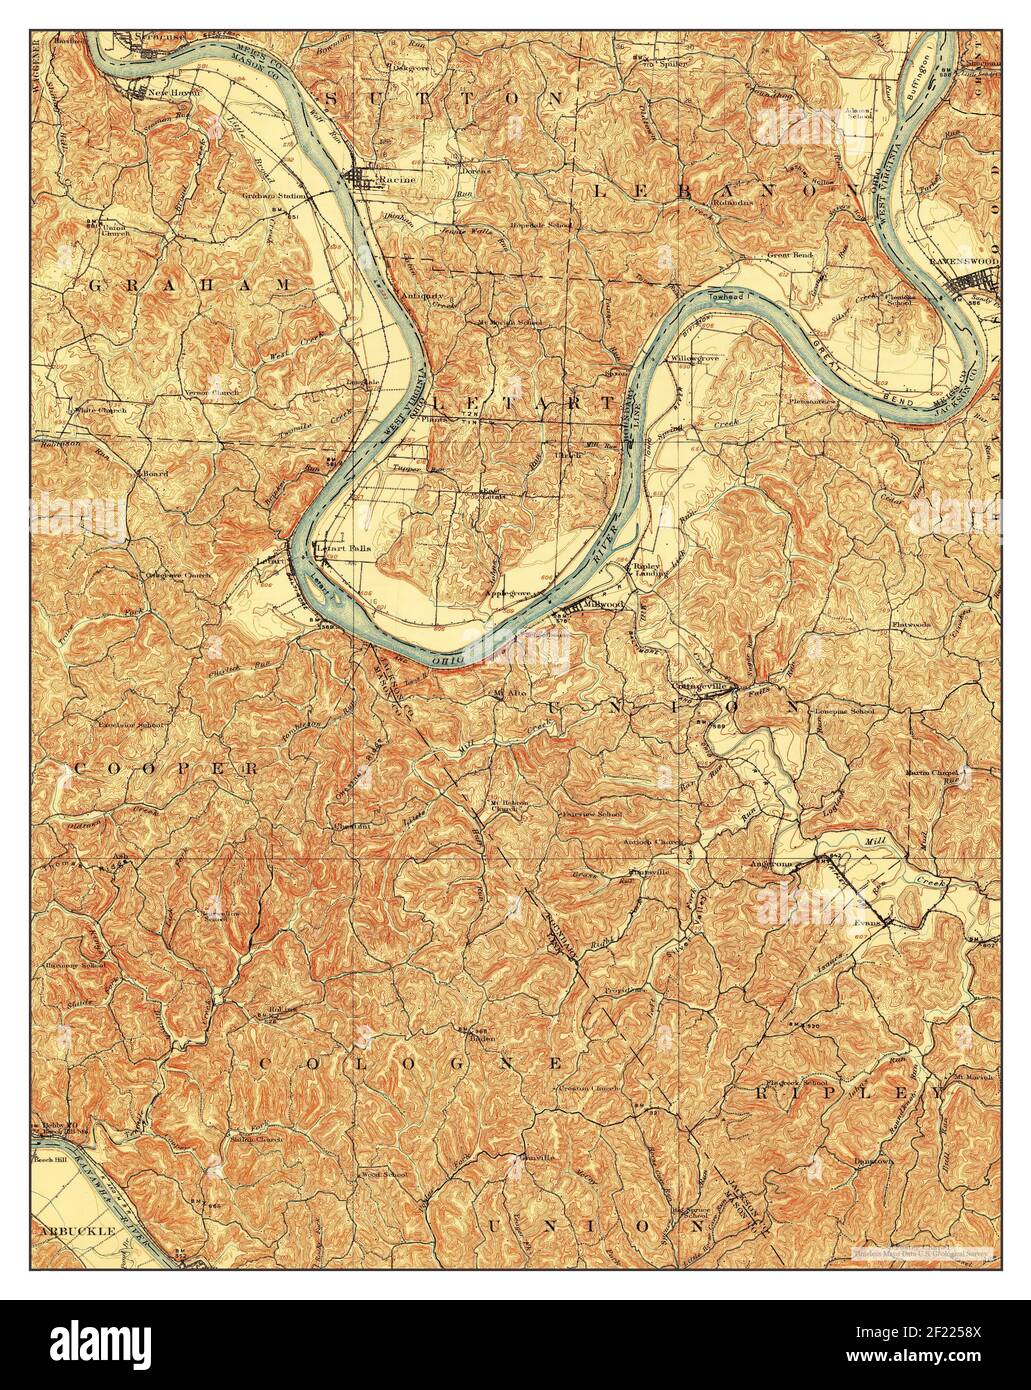 Ravenswood, West Virginia, map 1908, 1:62500, United States of America by Timeless Maps, data U.S. Geological Survey Stock Photo